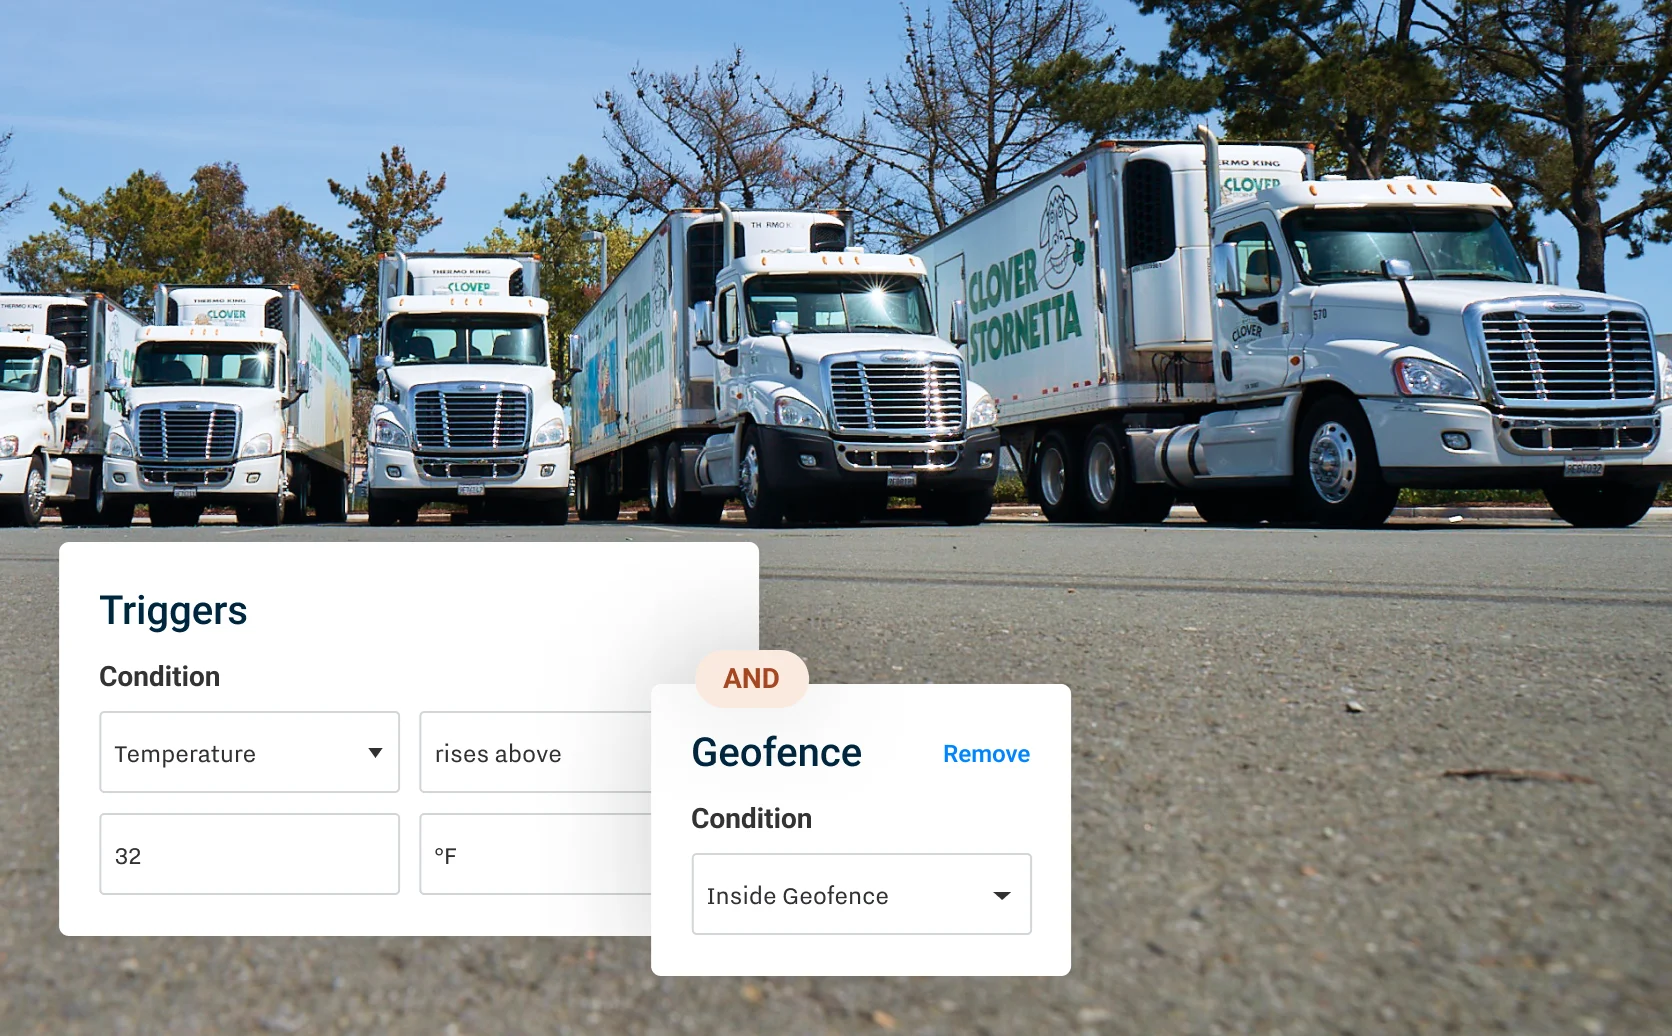 fleet of trucks with pop ups noting actionable alerts such as triggers and geofence